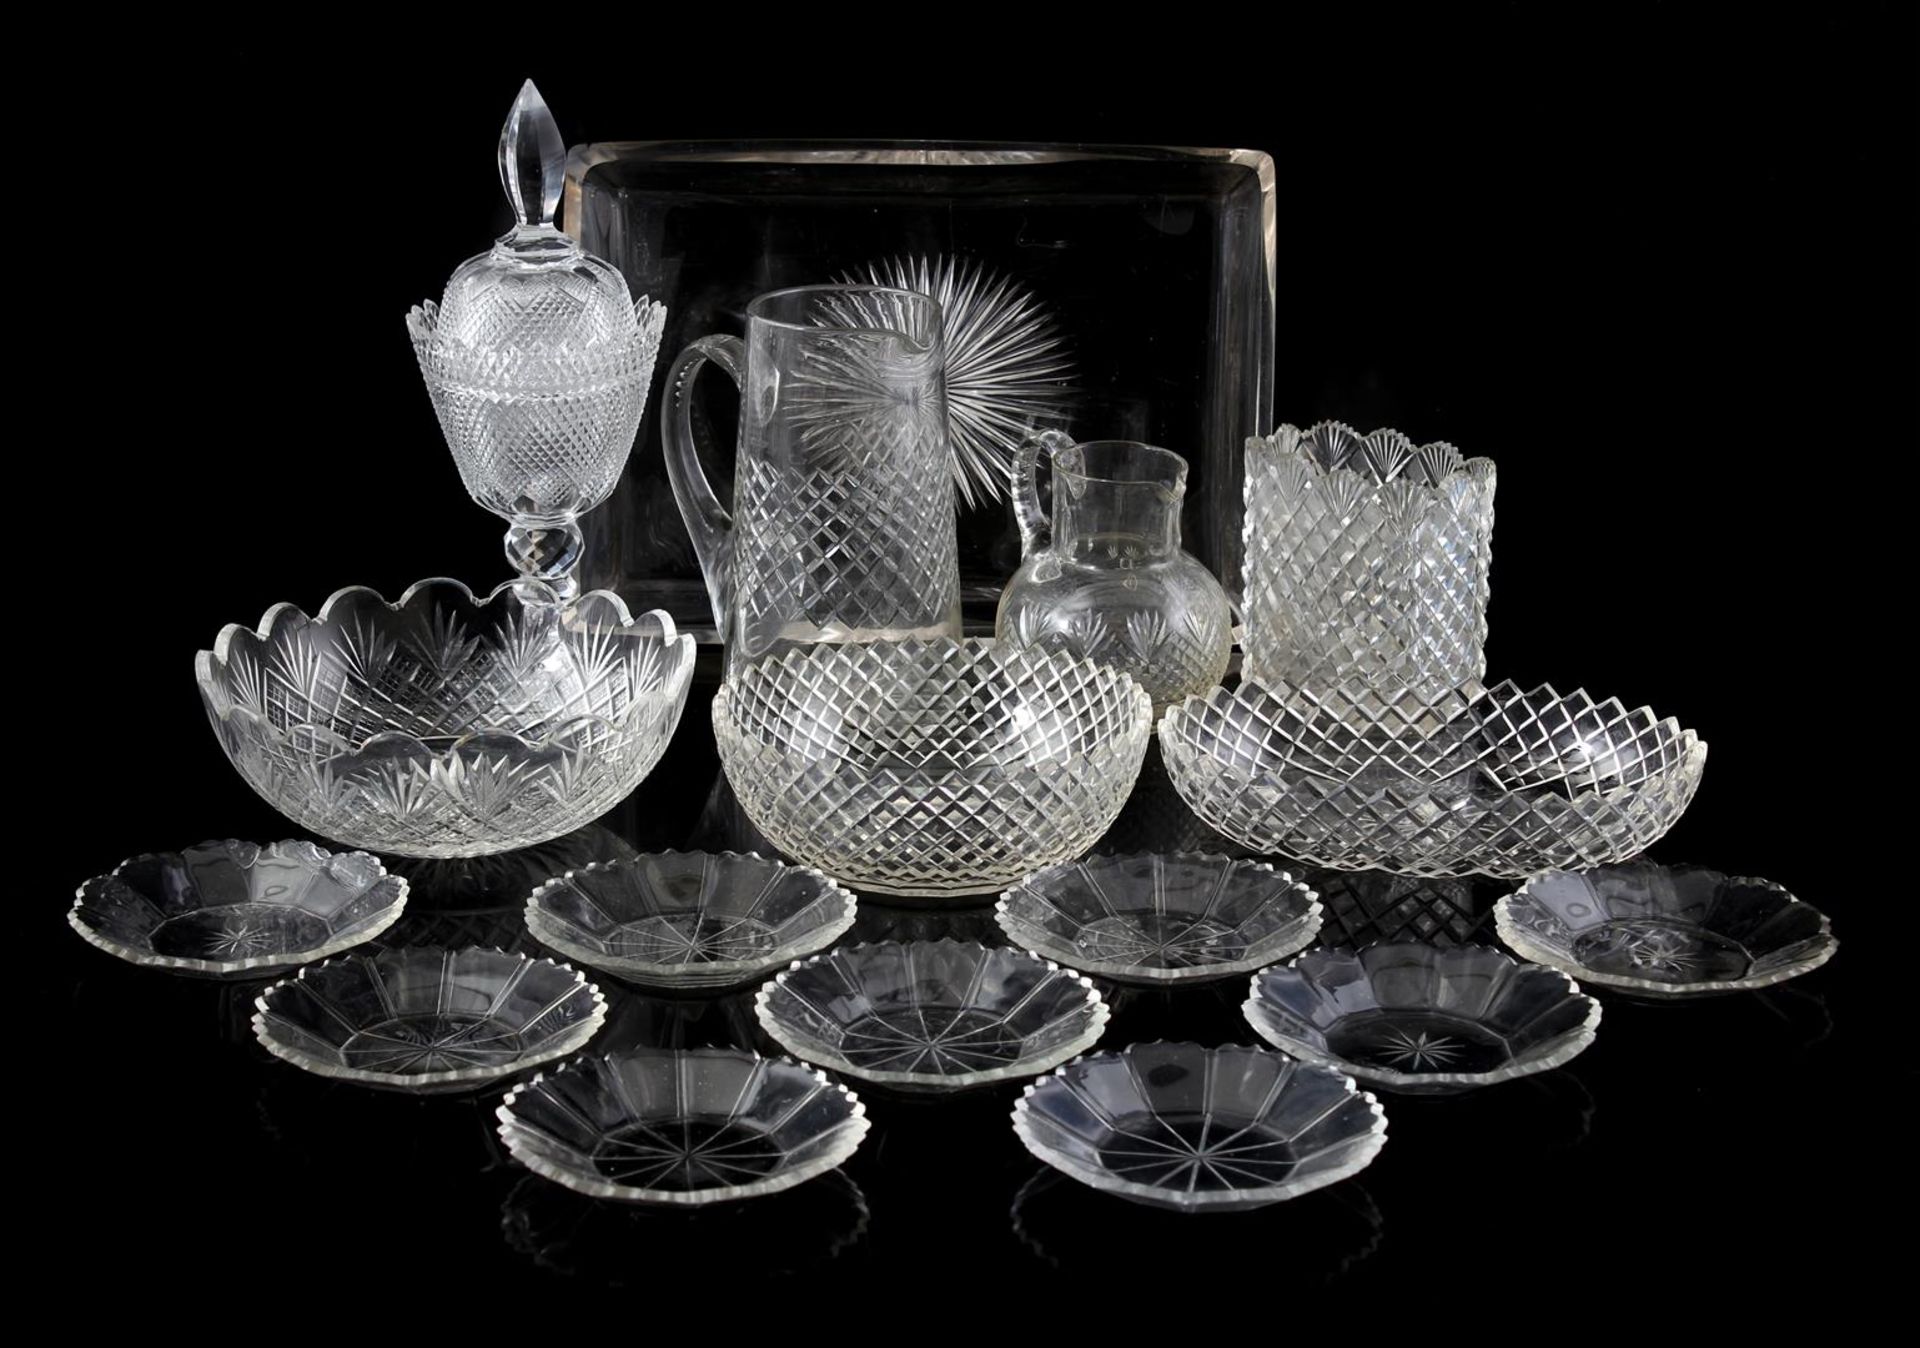 Lot various cut glass objects